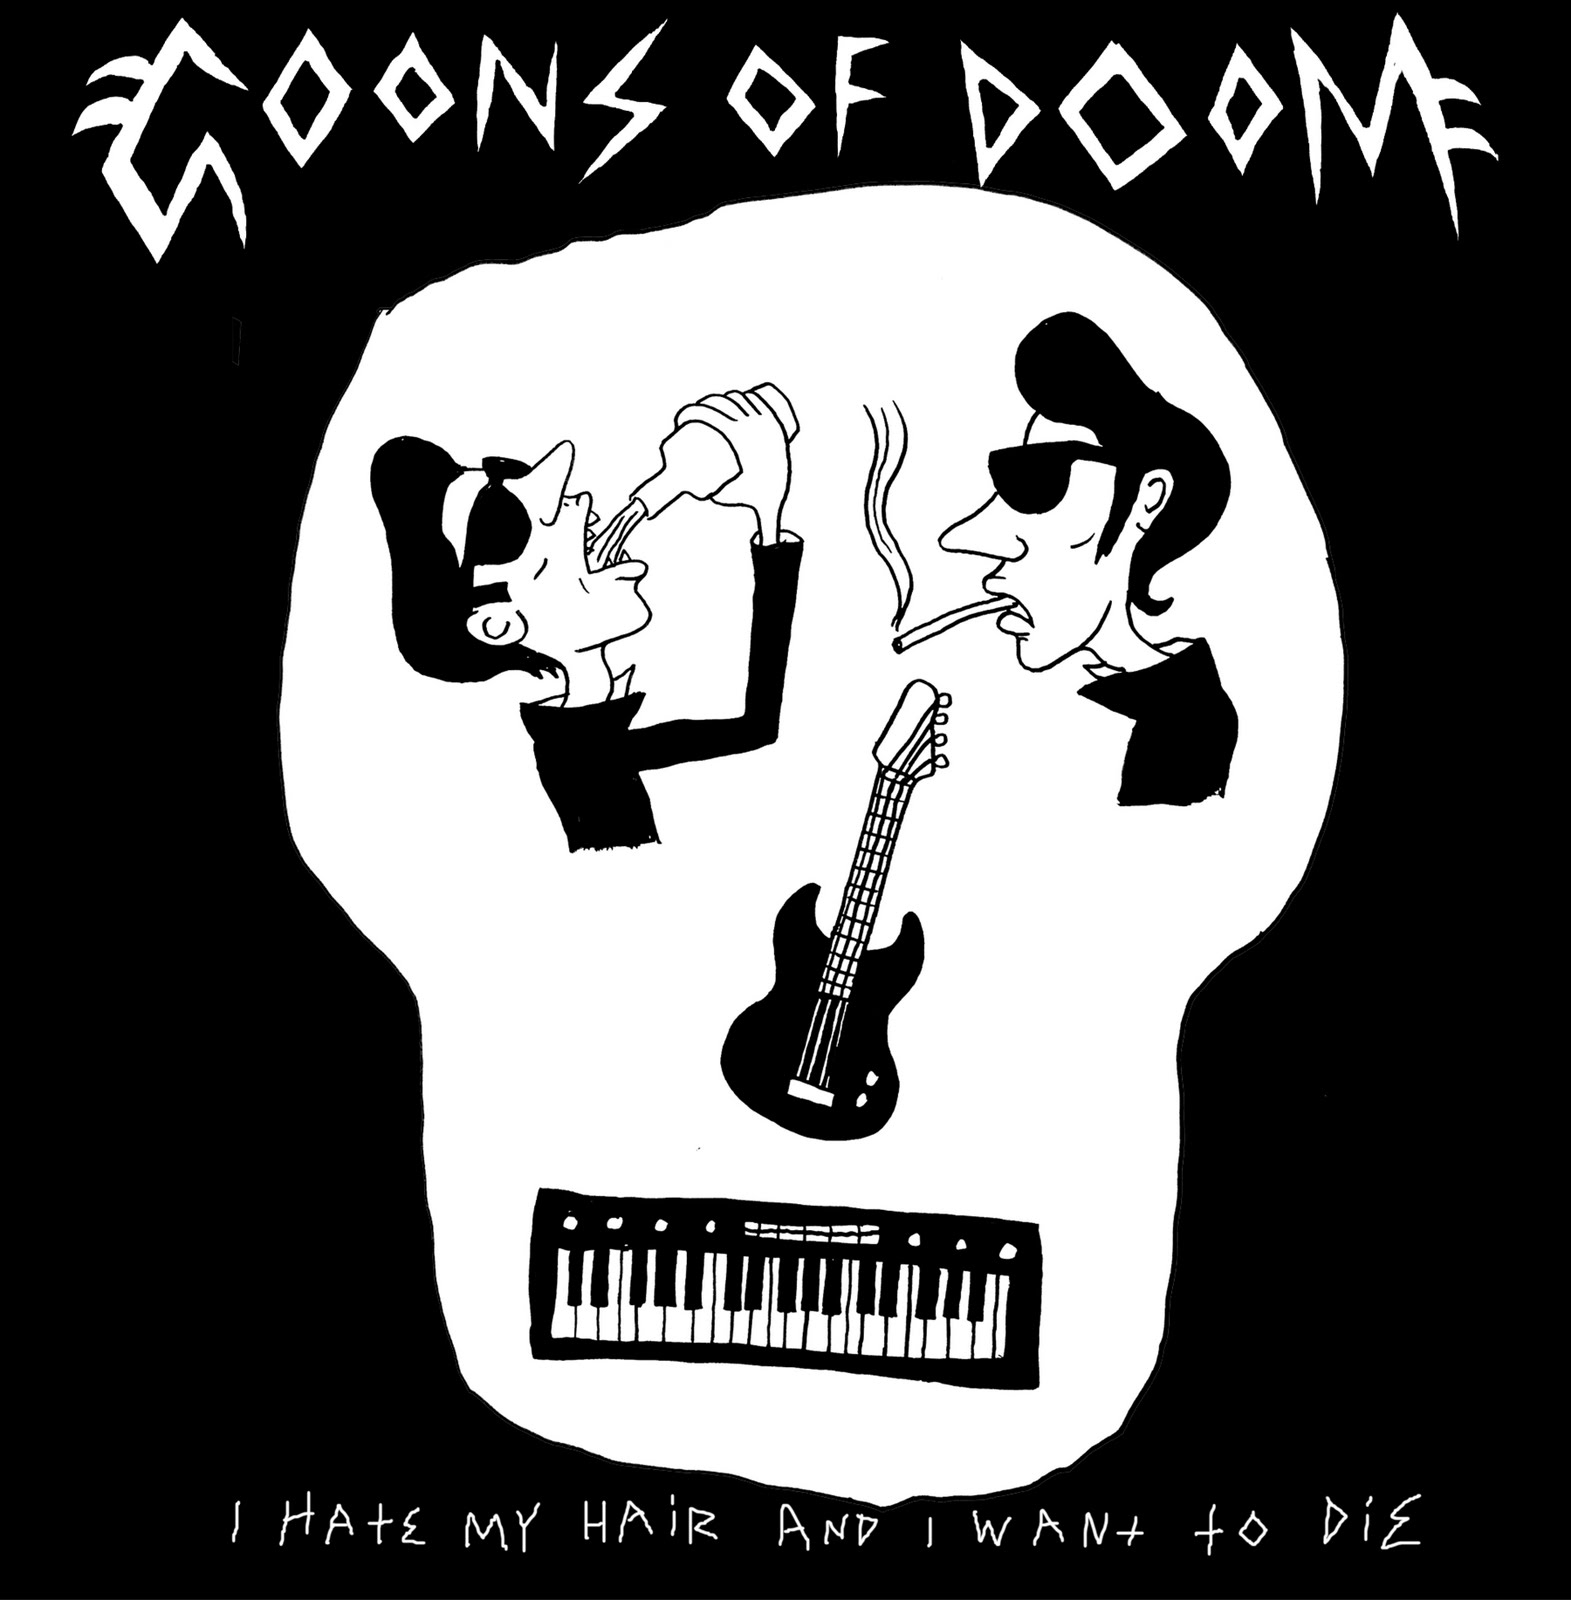 Surf's Up with GOON$ OF DOOM!